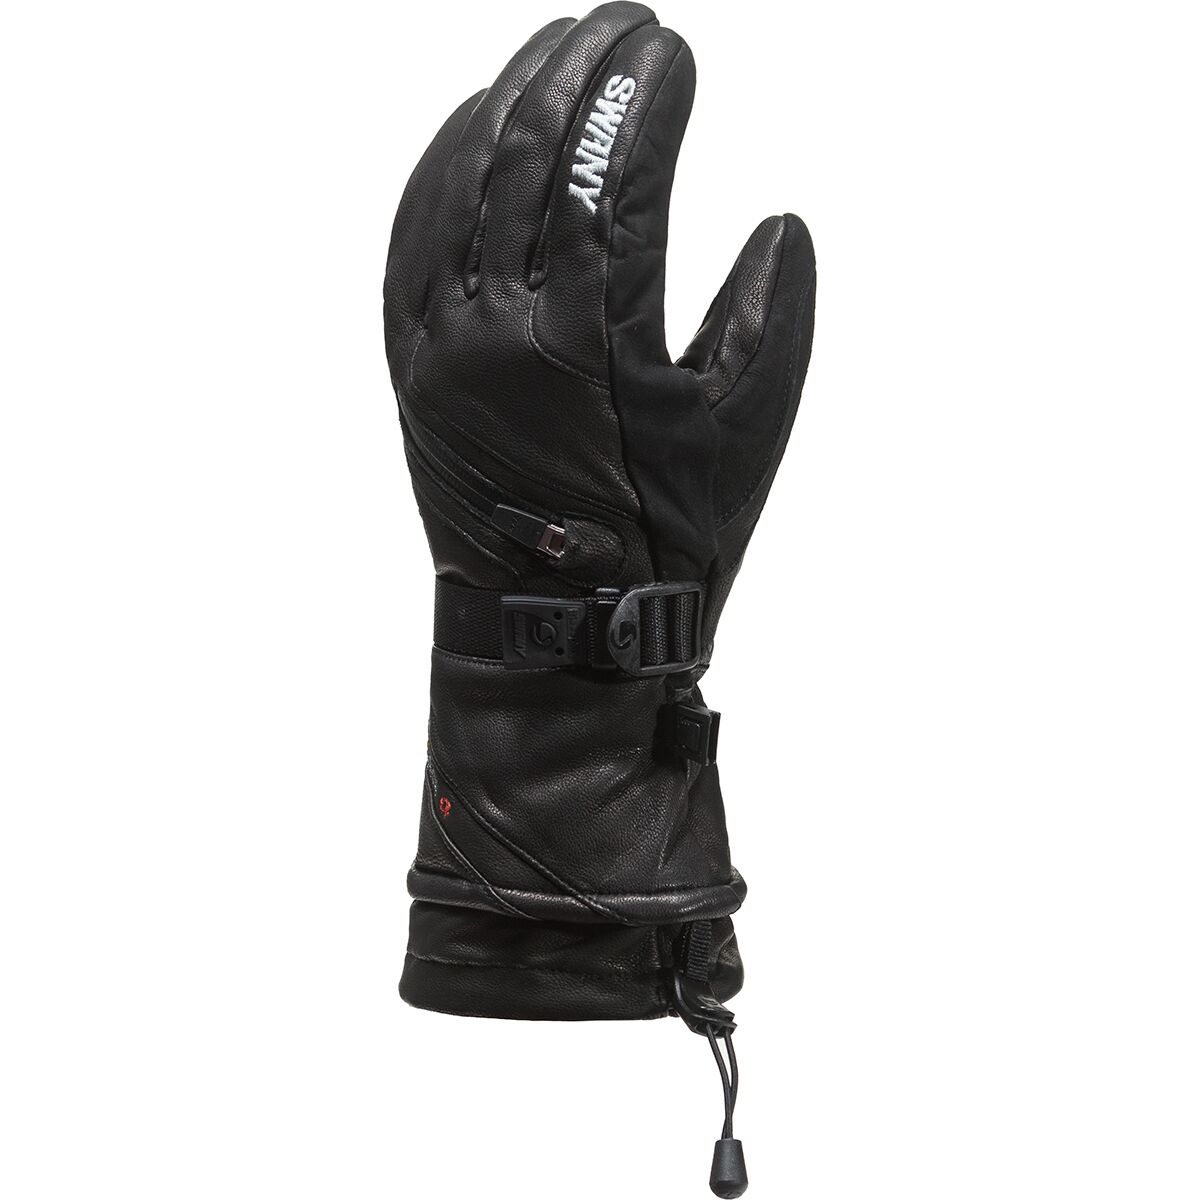 Swany X-Cell Glove - Men's